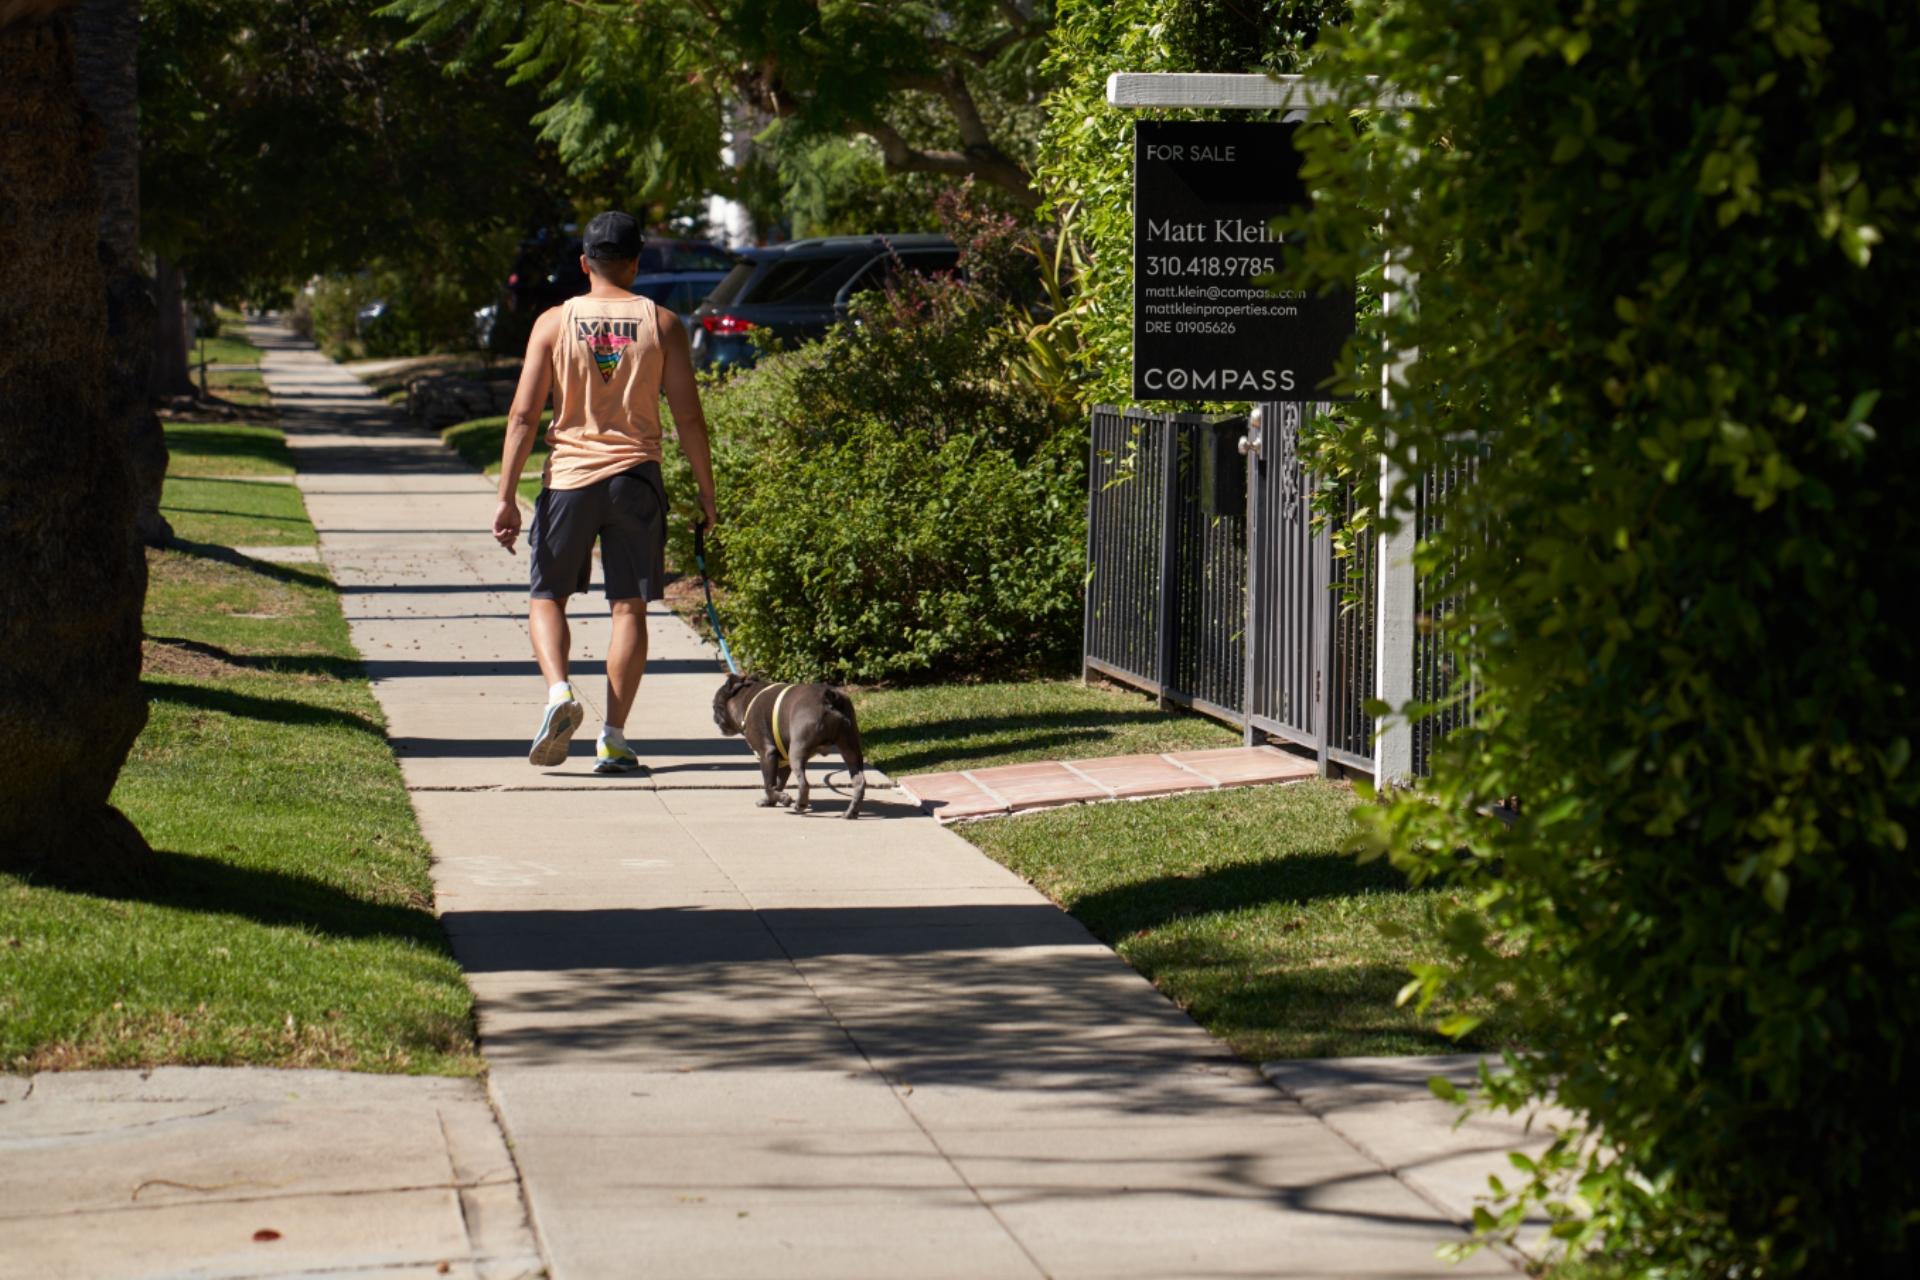 California Bill Could Ban Landlords From Asking Prospective Tenants About Pets